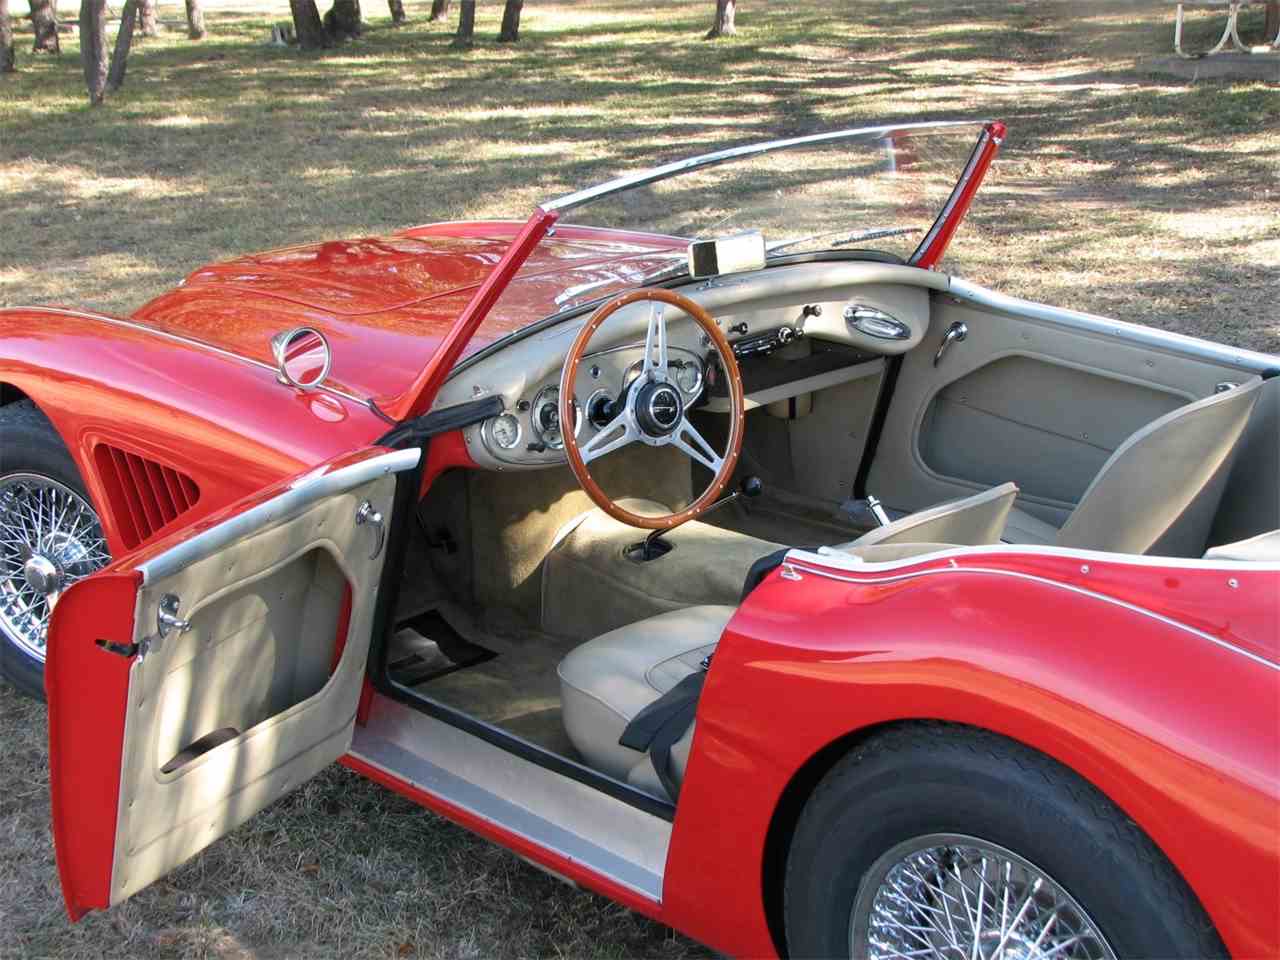 Family owned since ’61 Austin-Healey 3000 | ClassicCars.com Journal